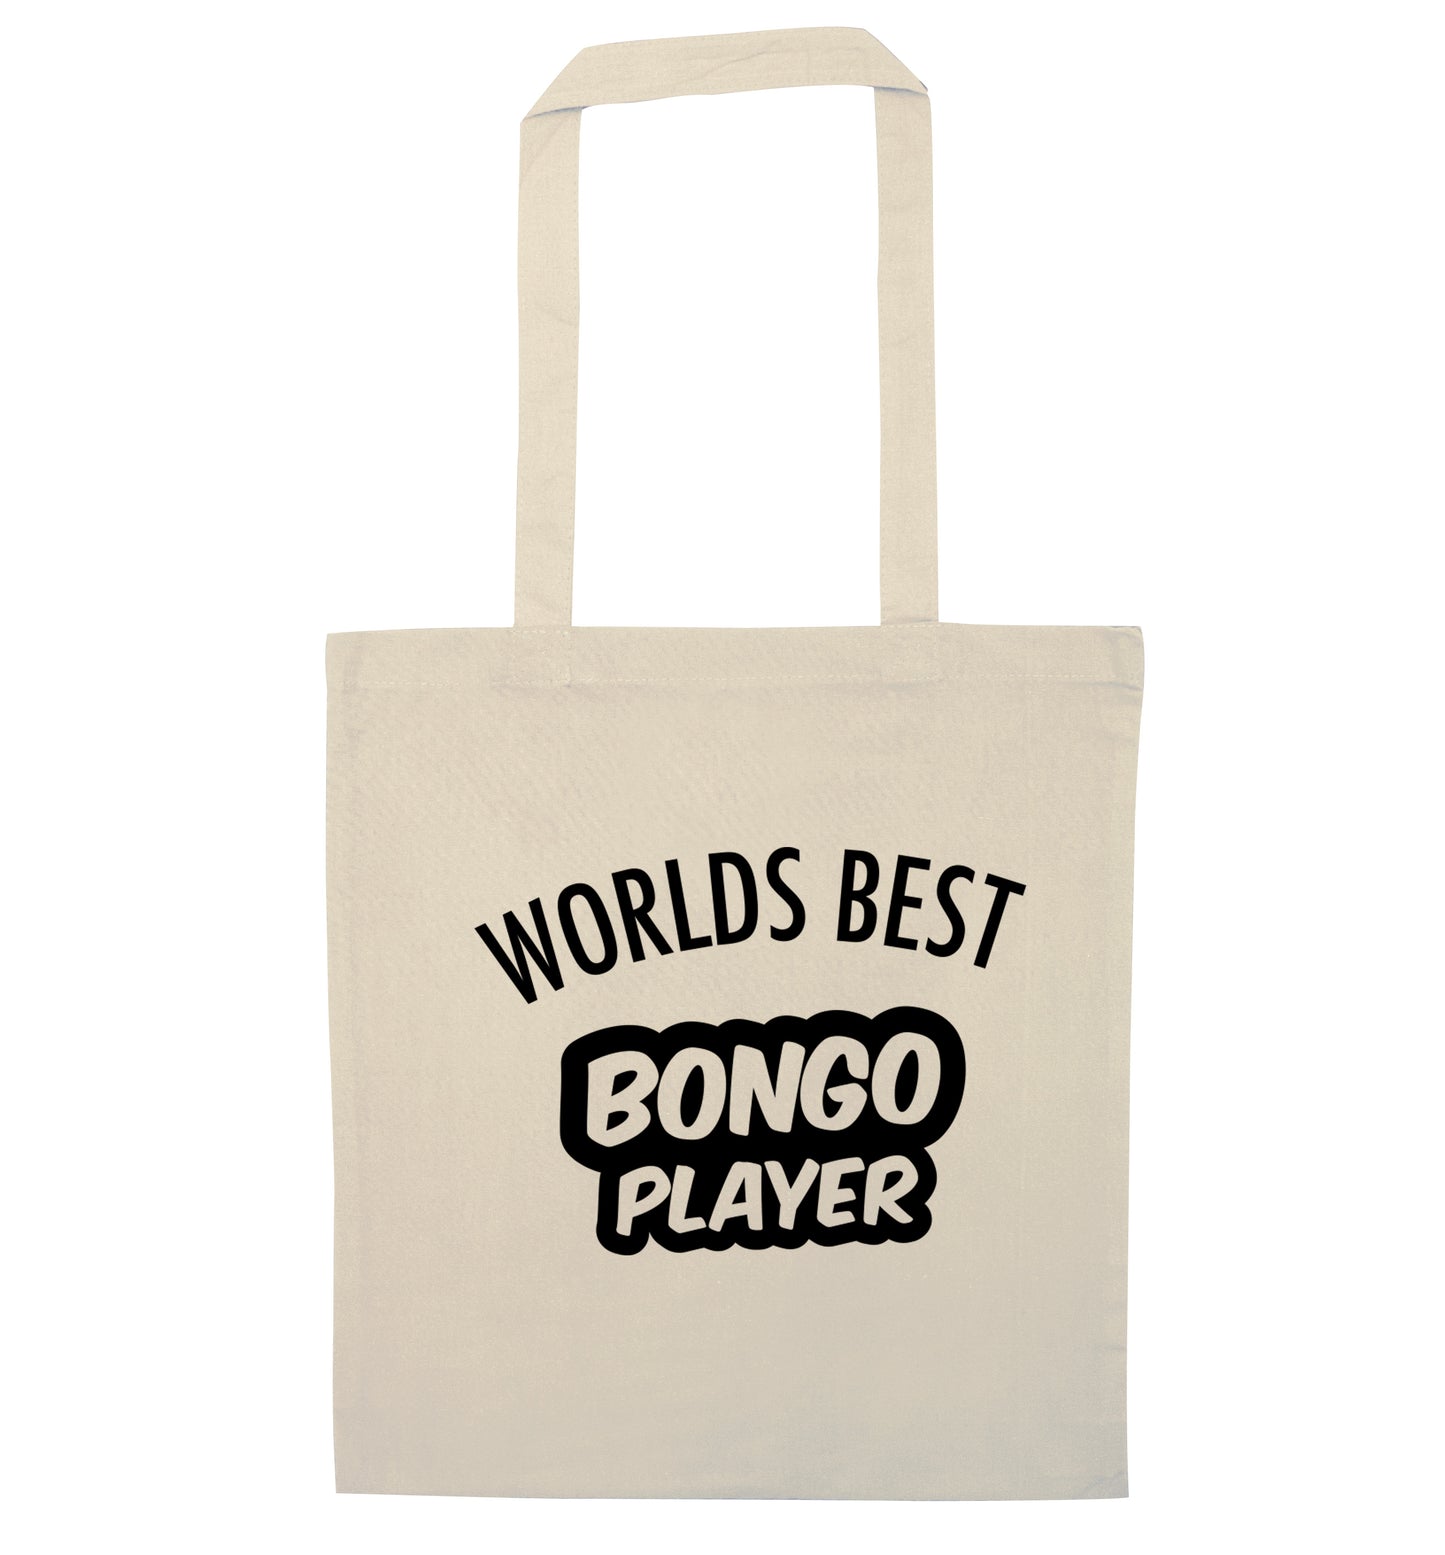 Worlds best bongo player natural tote bag